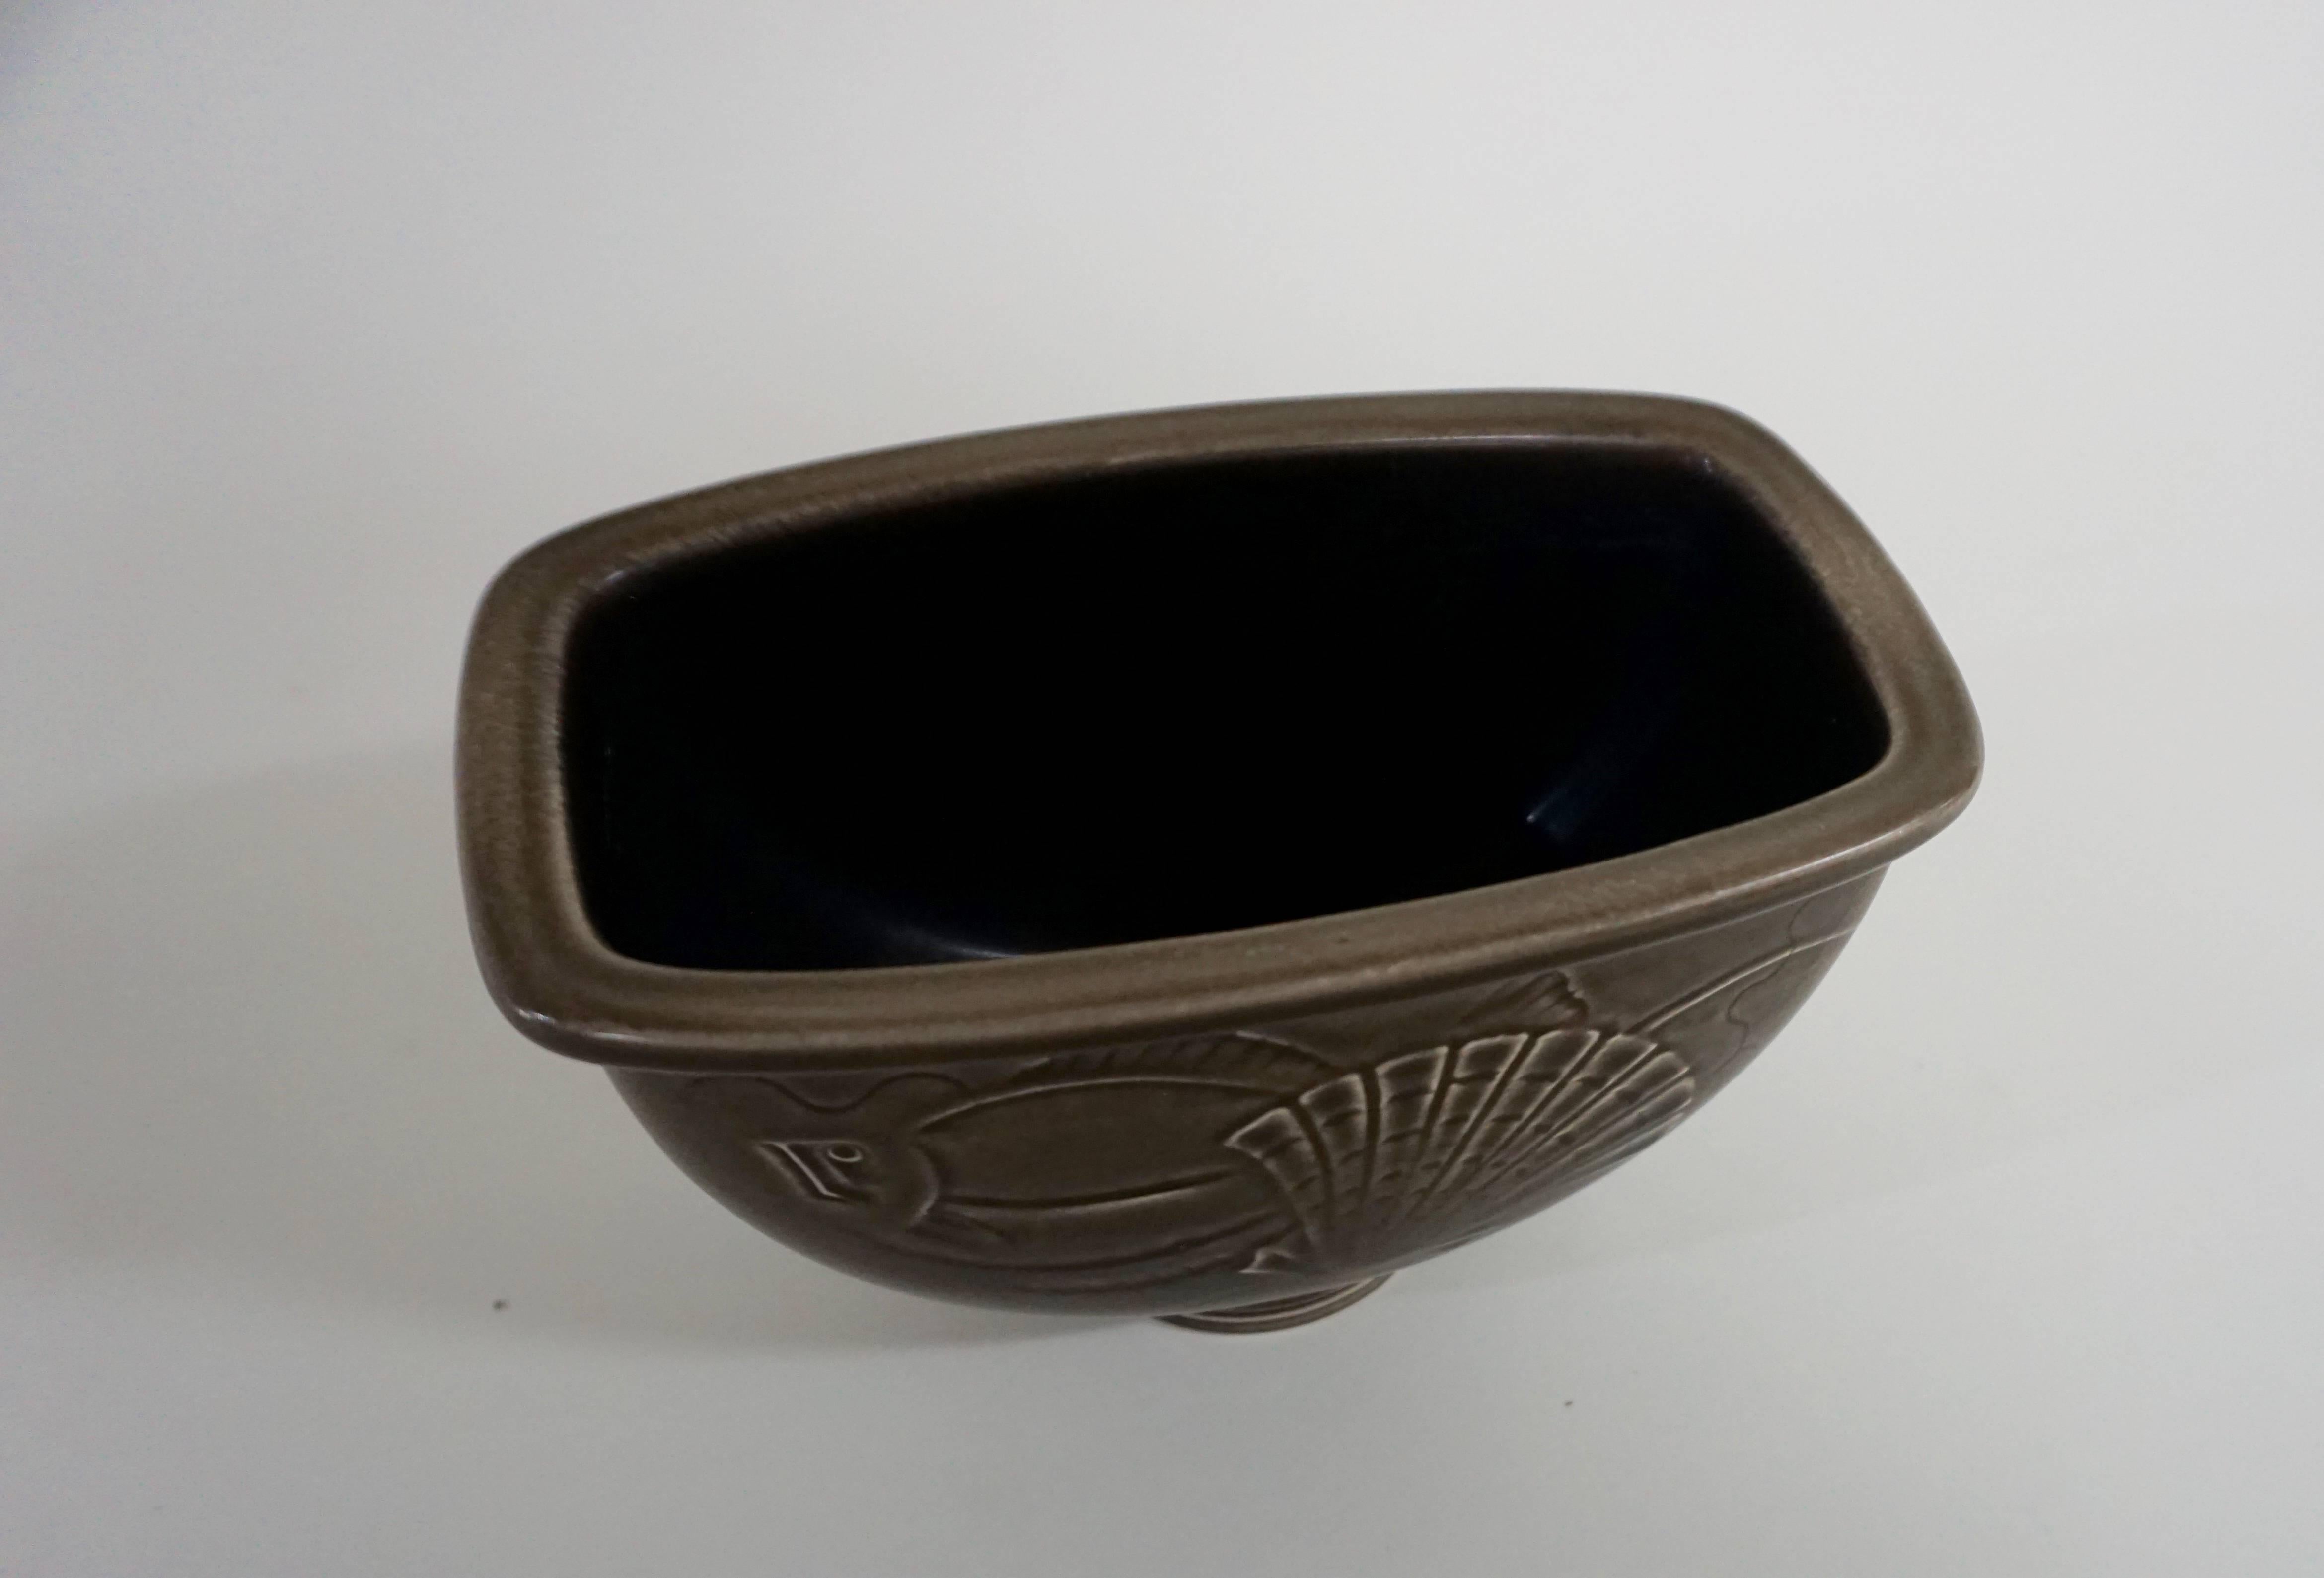 Labeled. Design by Nils Thorsen. Motif on front and back. Brown glaze. No chips or cracks.